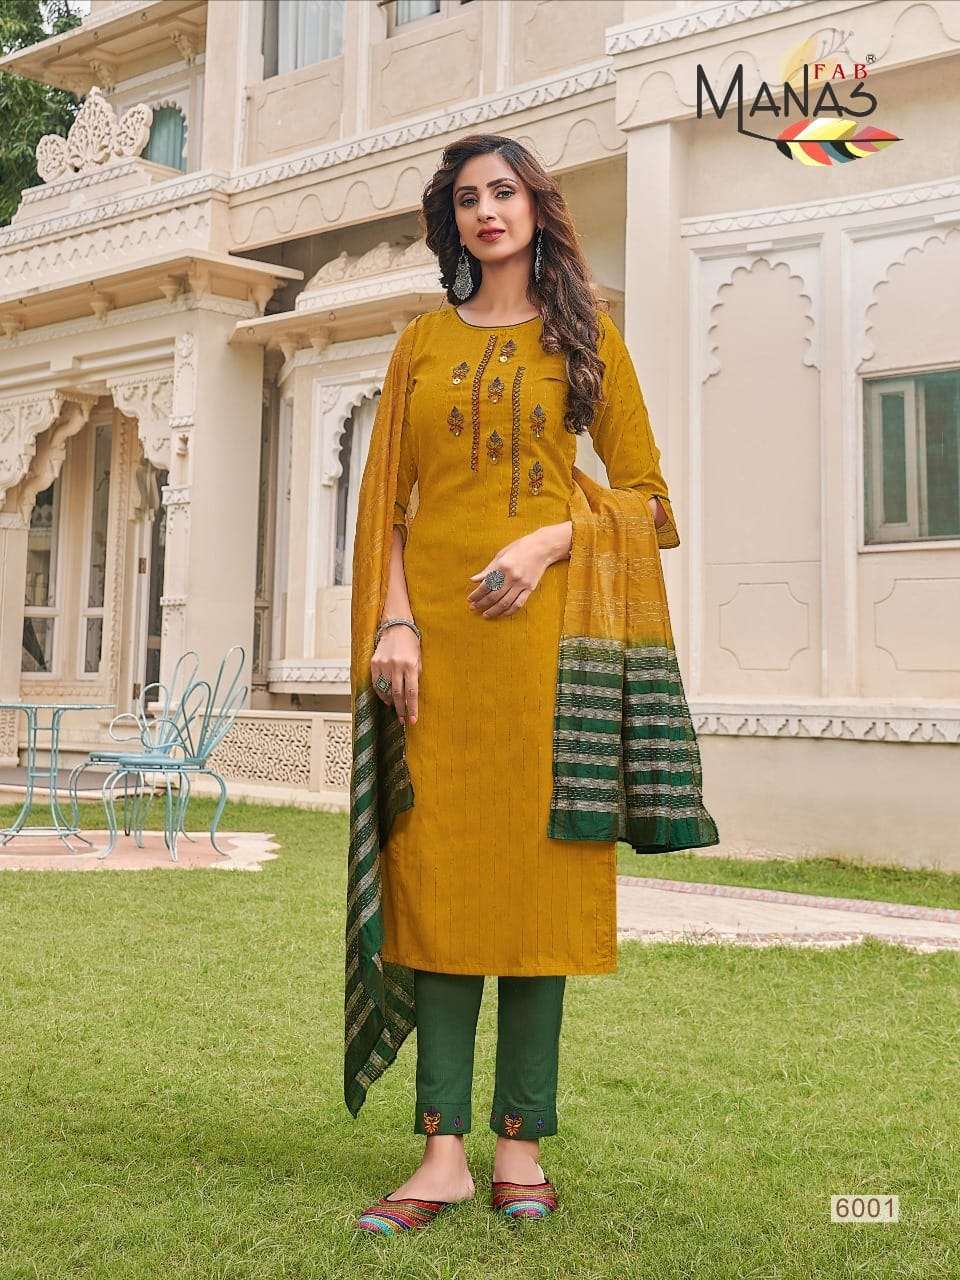 MANAS FAB PRESENTS ARINA FANCY SEQUENCE WHOLESALE READYMADE COLLECTION